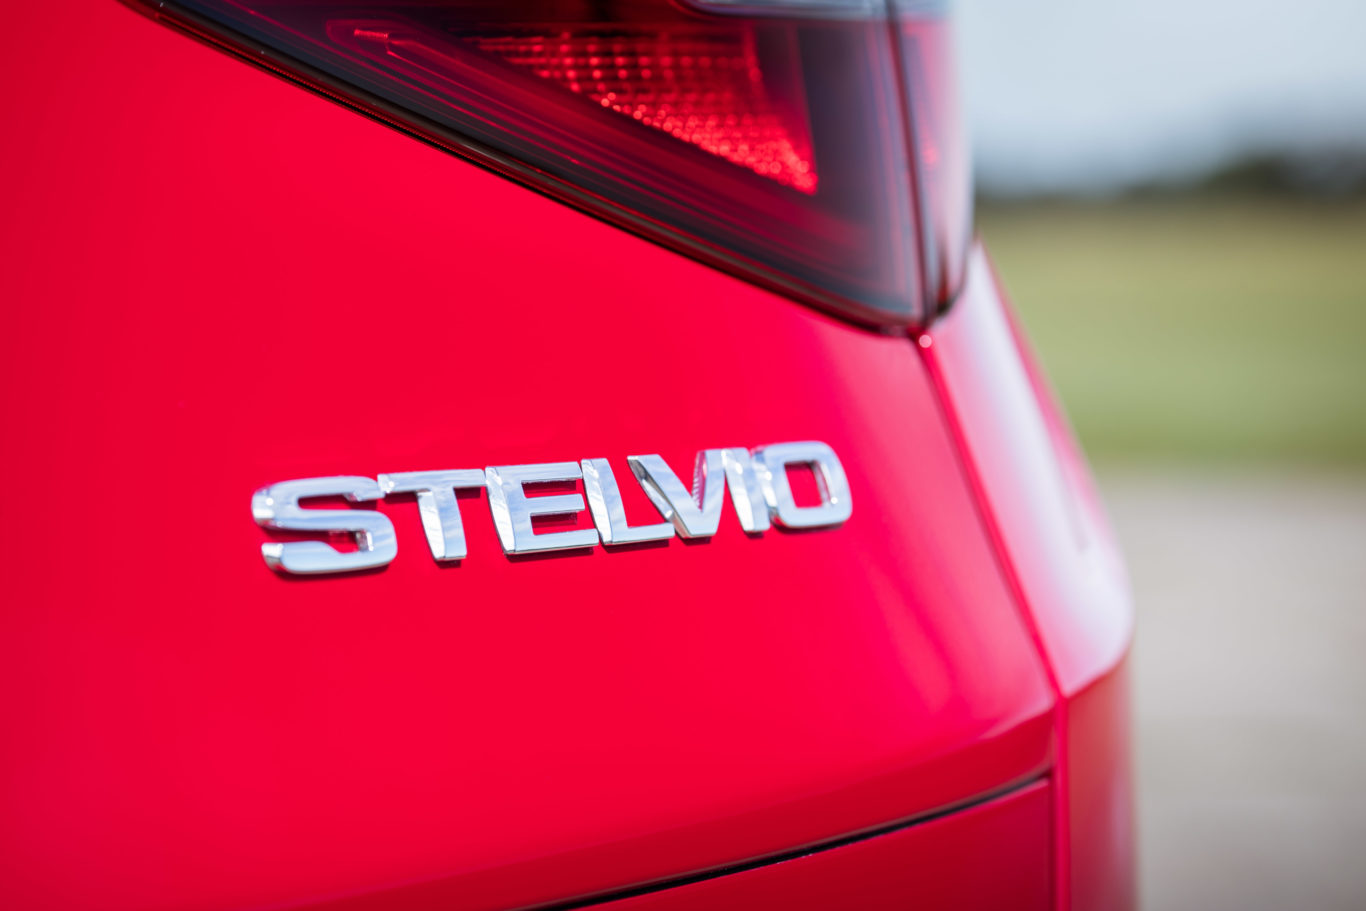 Chrome badging helps to give the Stelvio a premium look